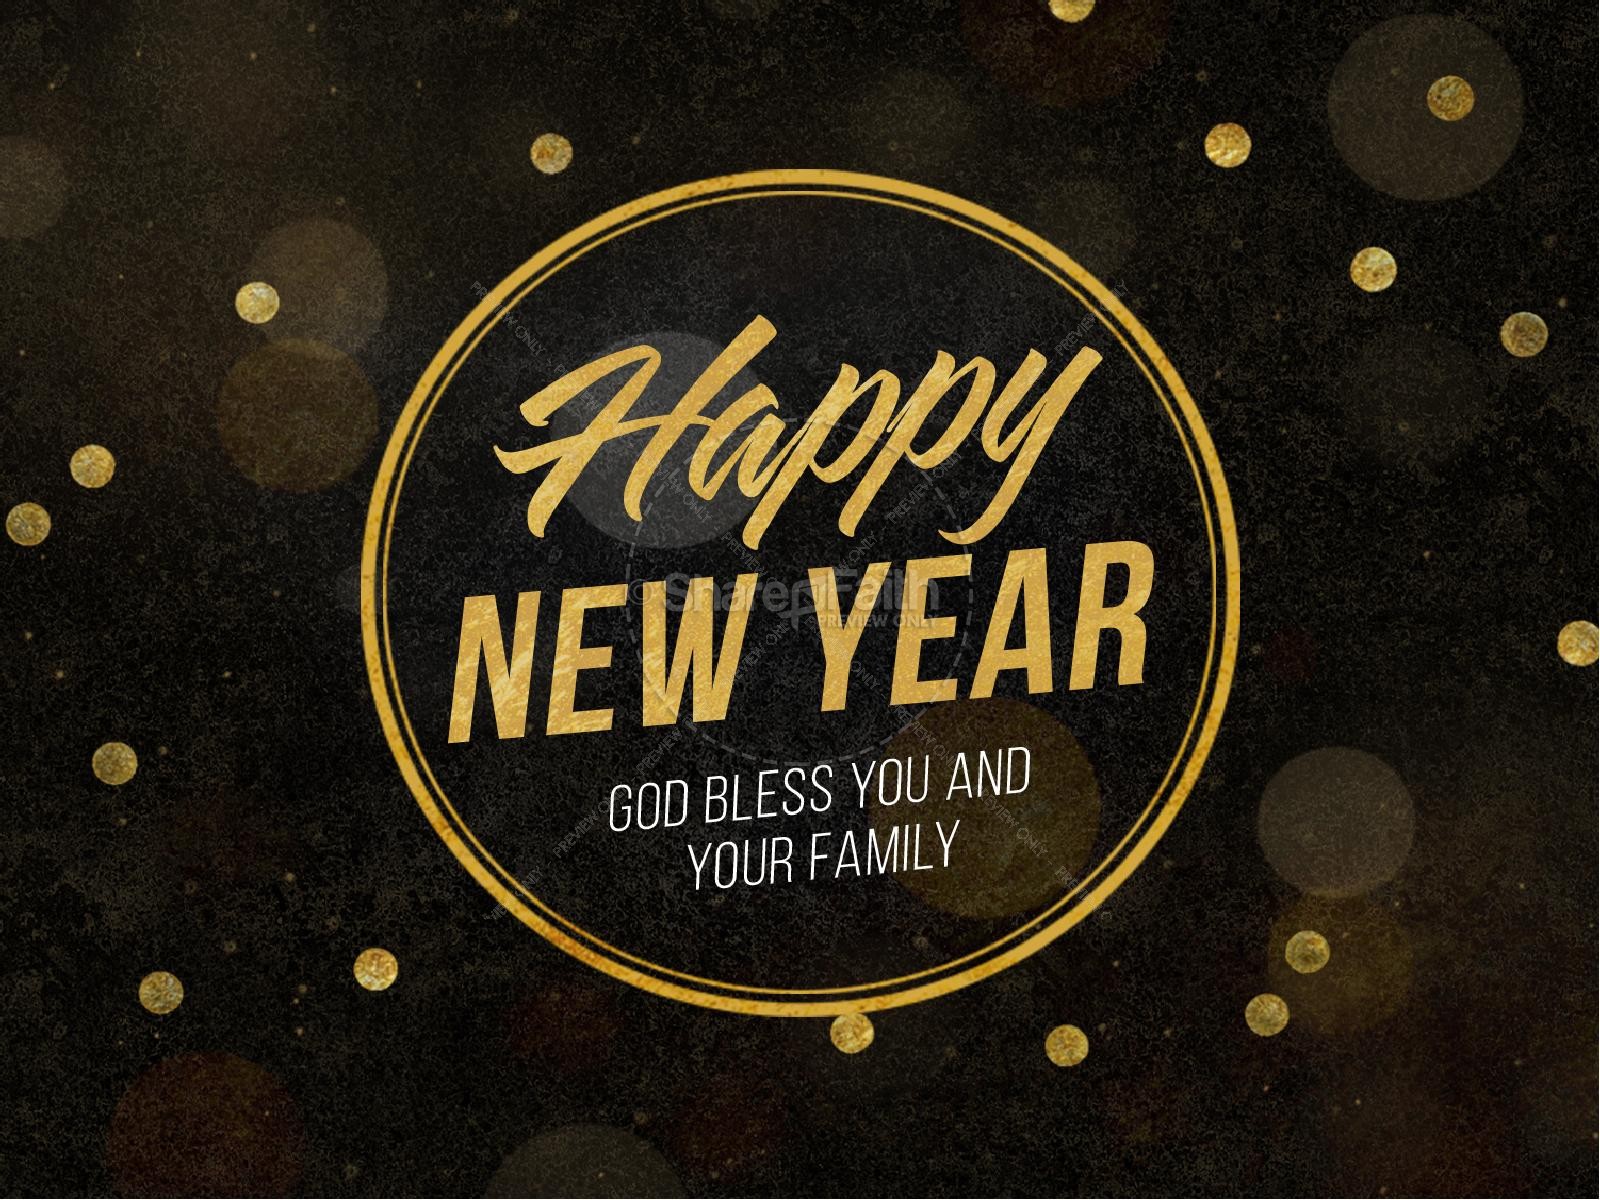 Happy New Year Blessings Church PowerPoint